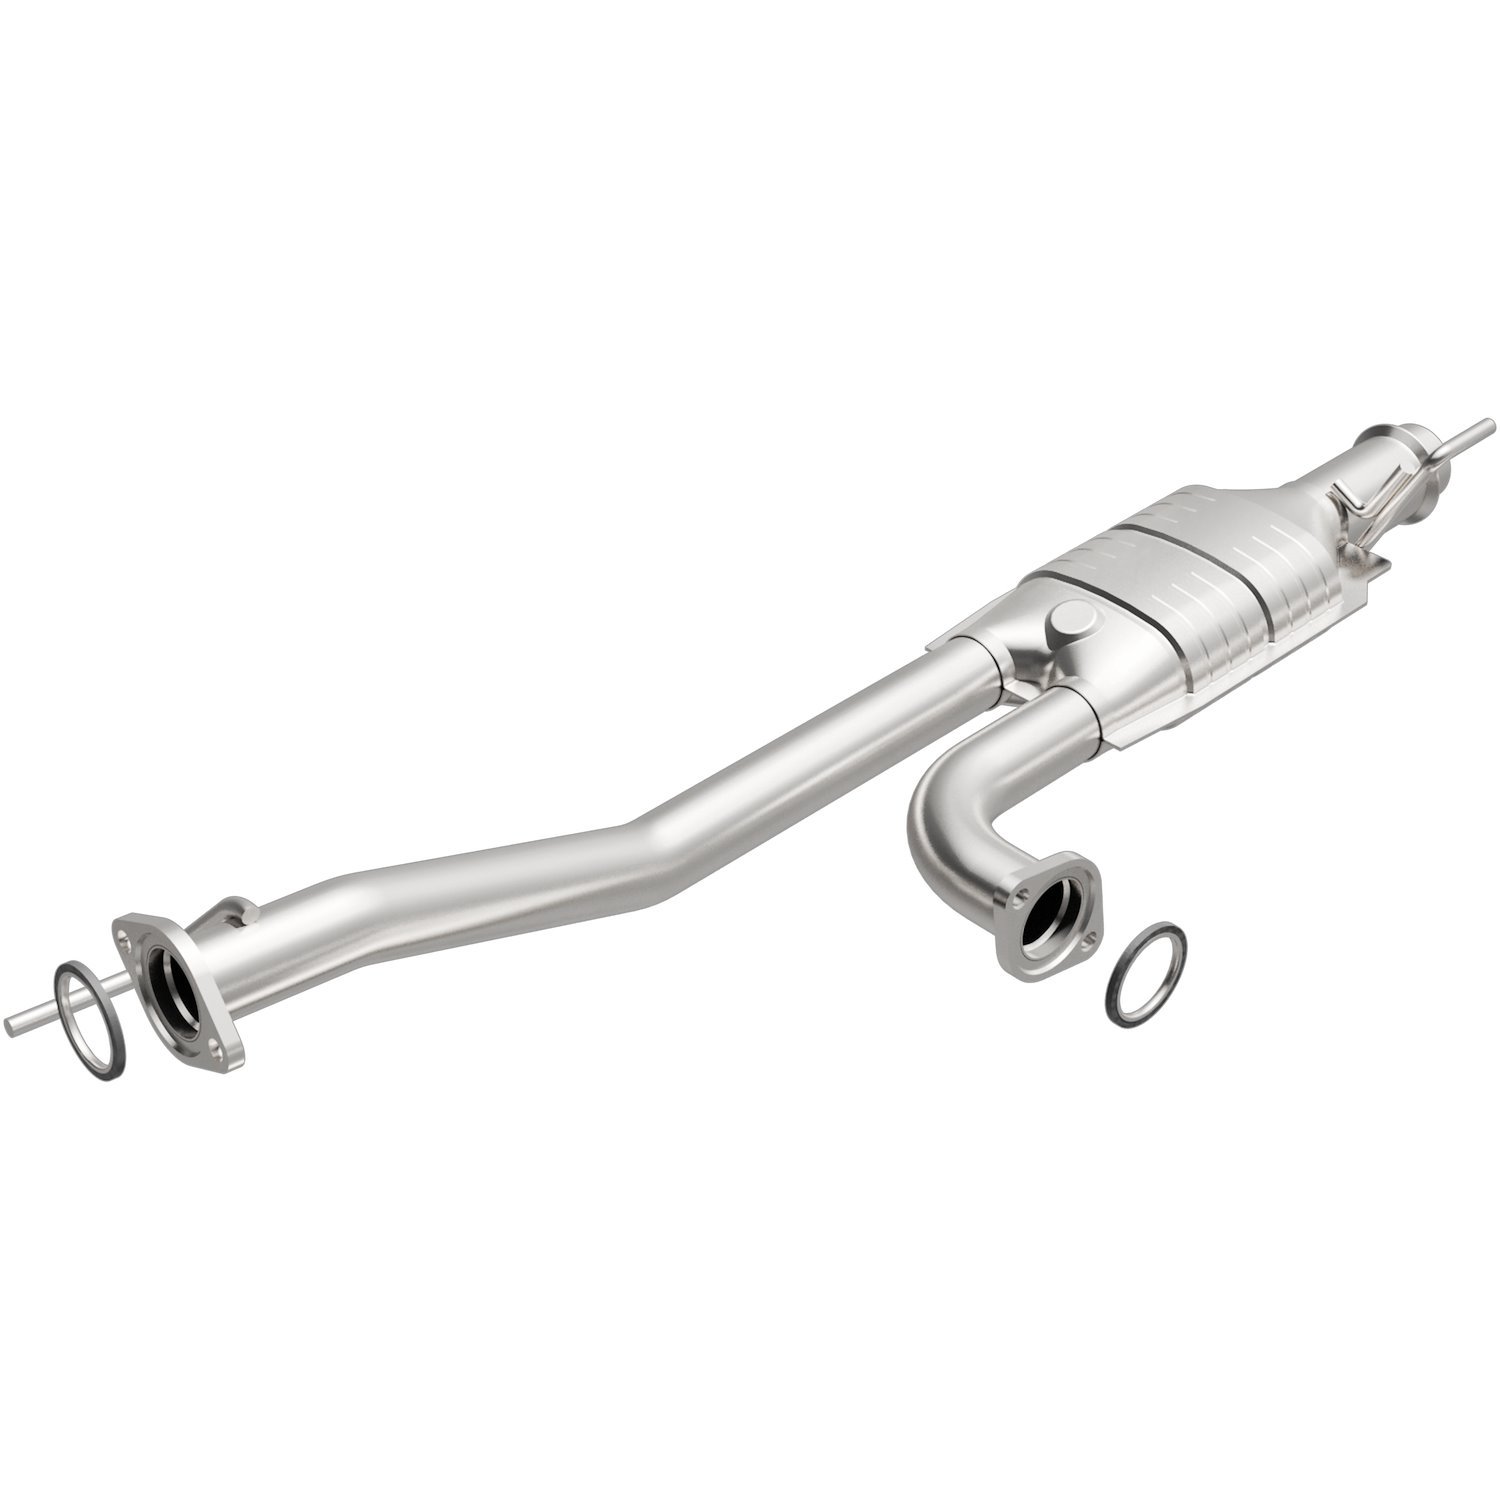 2000-2002 Toyota Tundra HM Grade Federal / EPA Compliant Direct-Fit Catalytic Converter